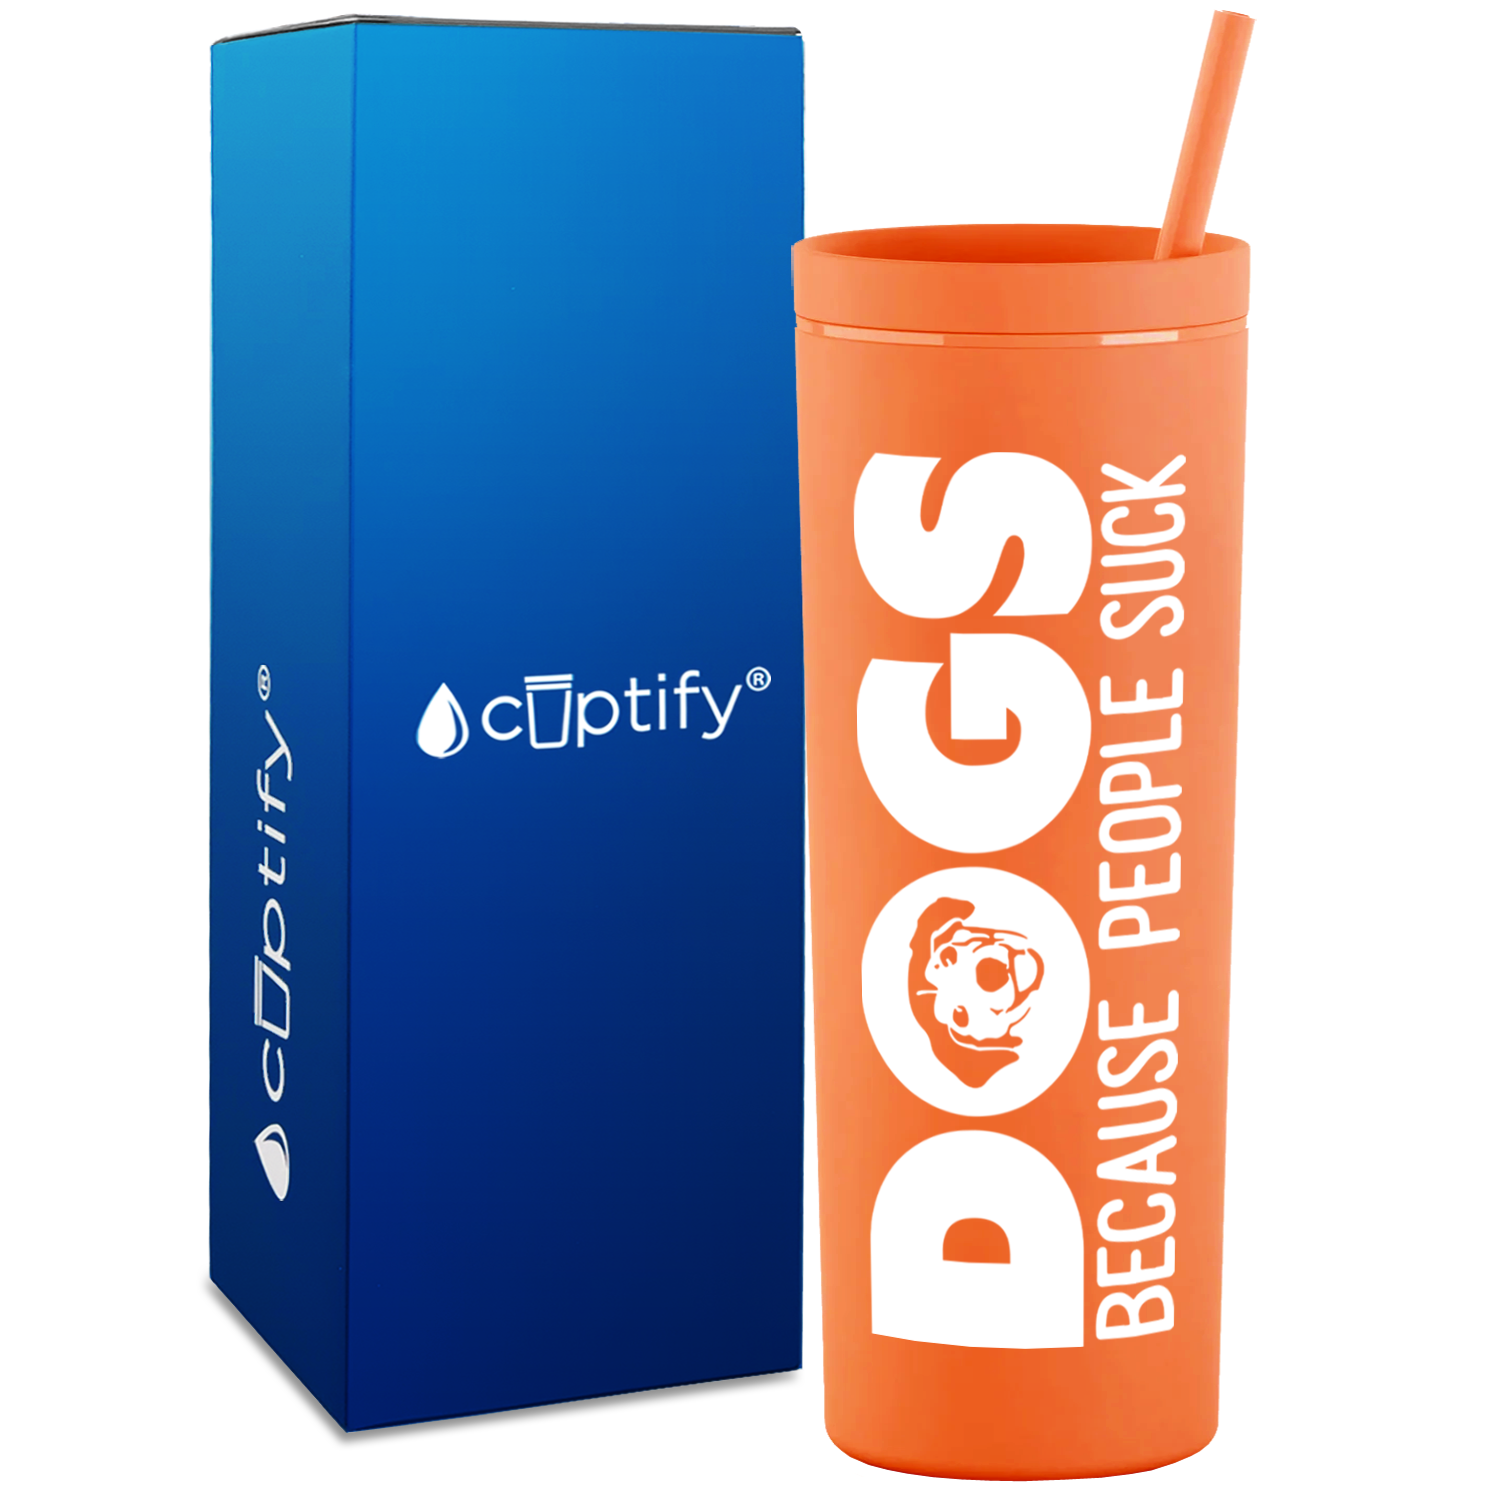 Dogs Because People Suck on 18oz Acrylic Skinny Tumbler